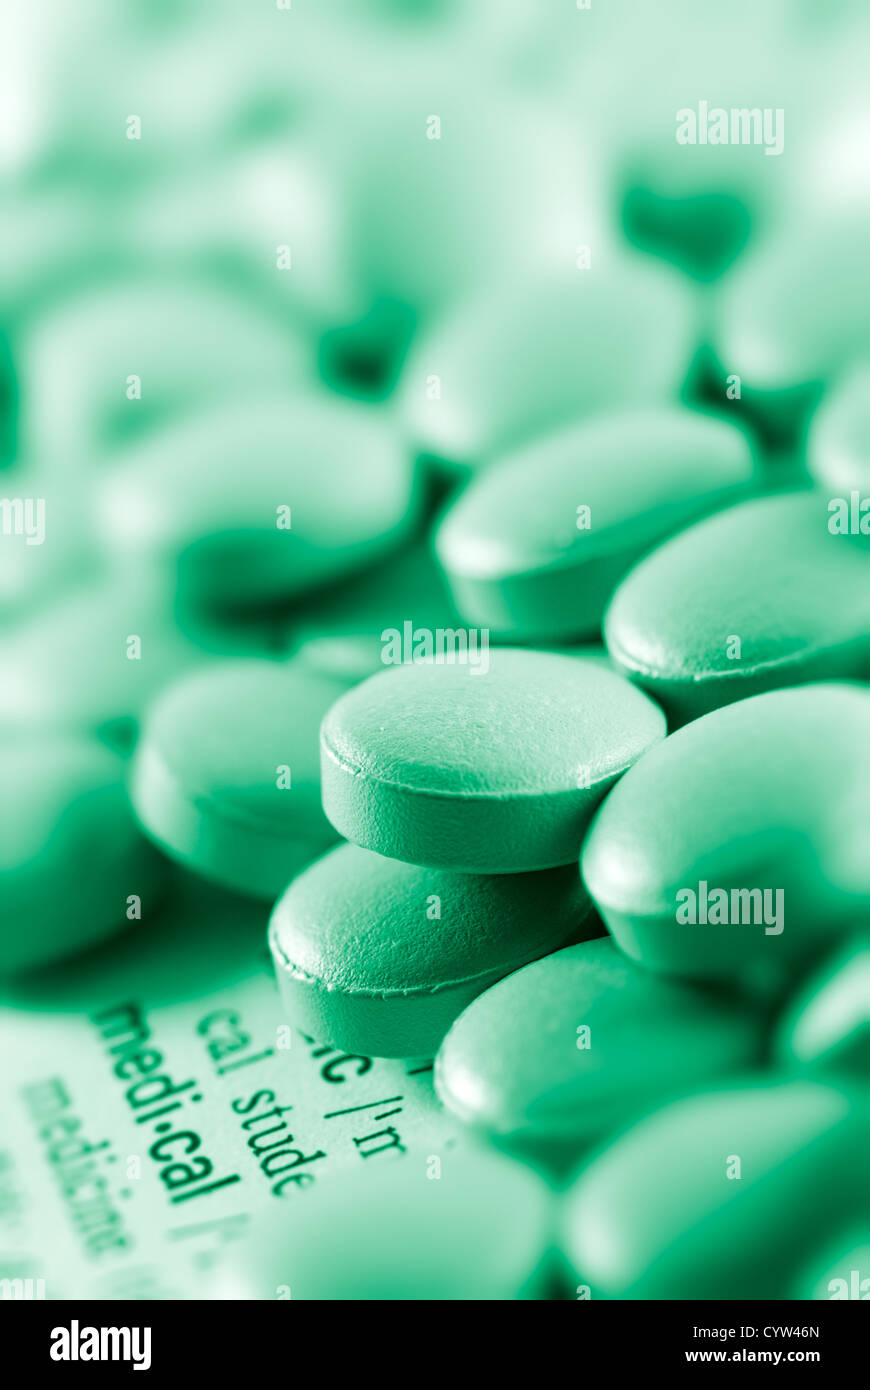 Here are too many pills that will be overdosed. Stock Photo